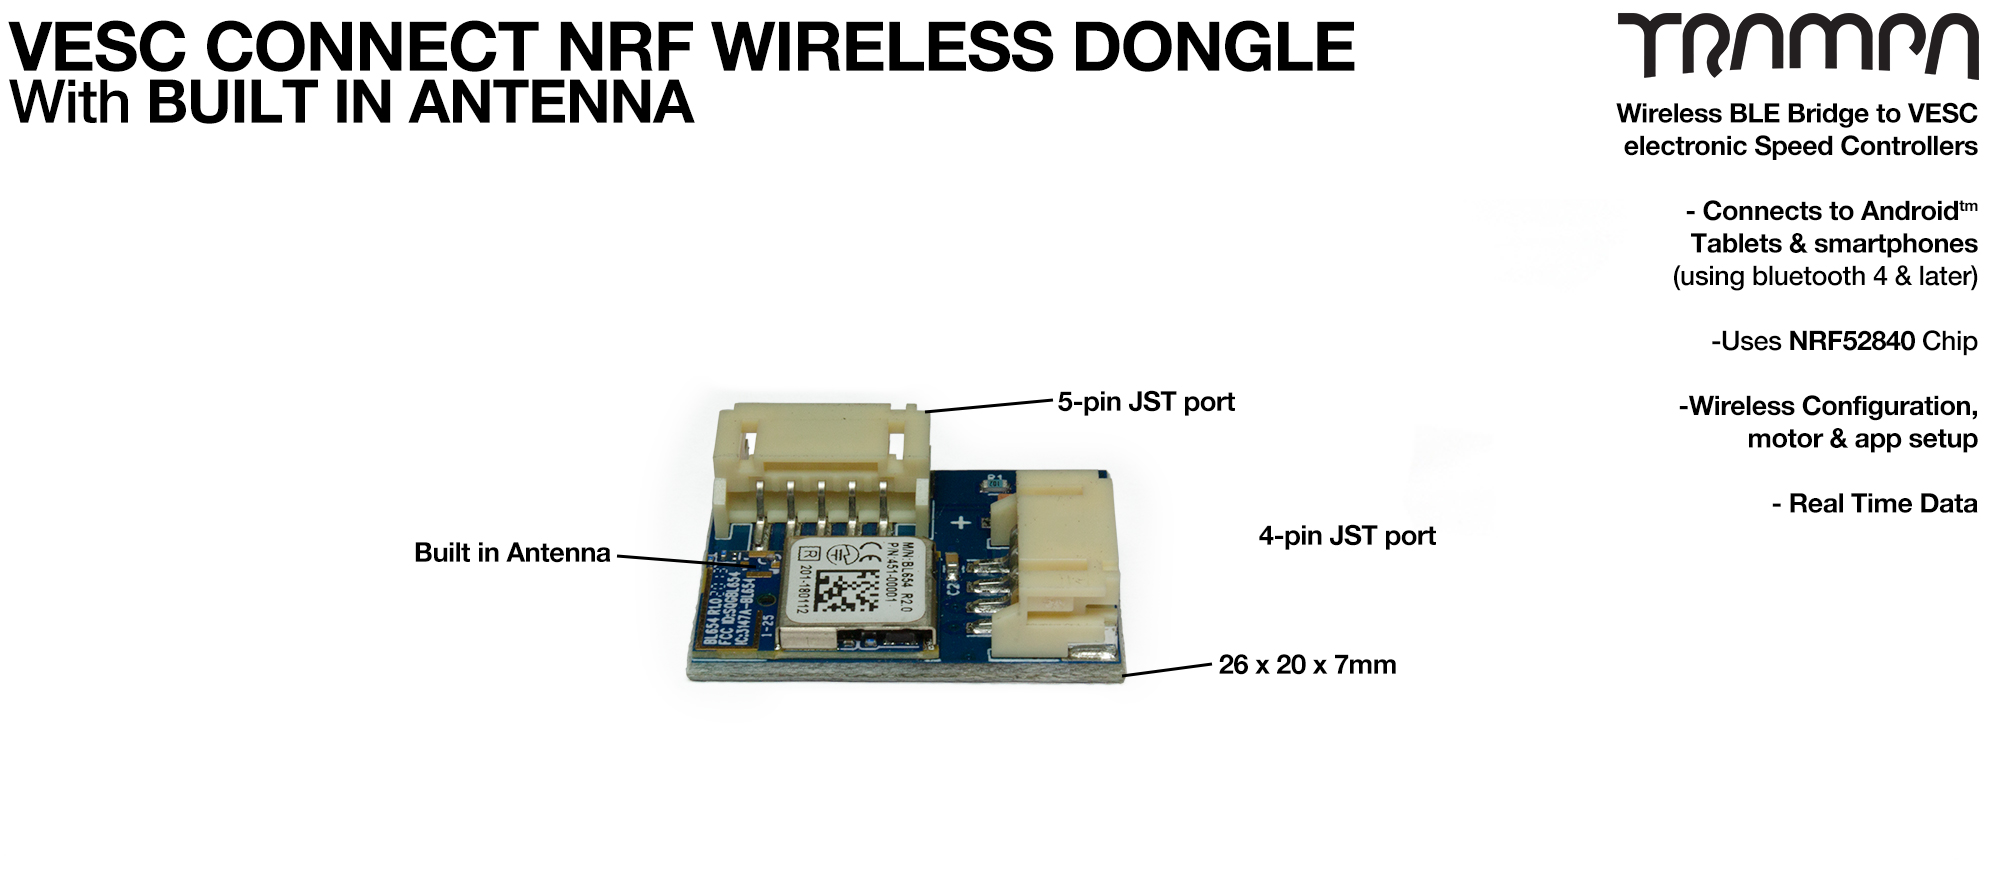 VESC Connect NRF Wireless Dongle with INTEGRATED ANTENNA